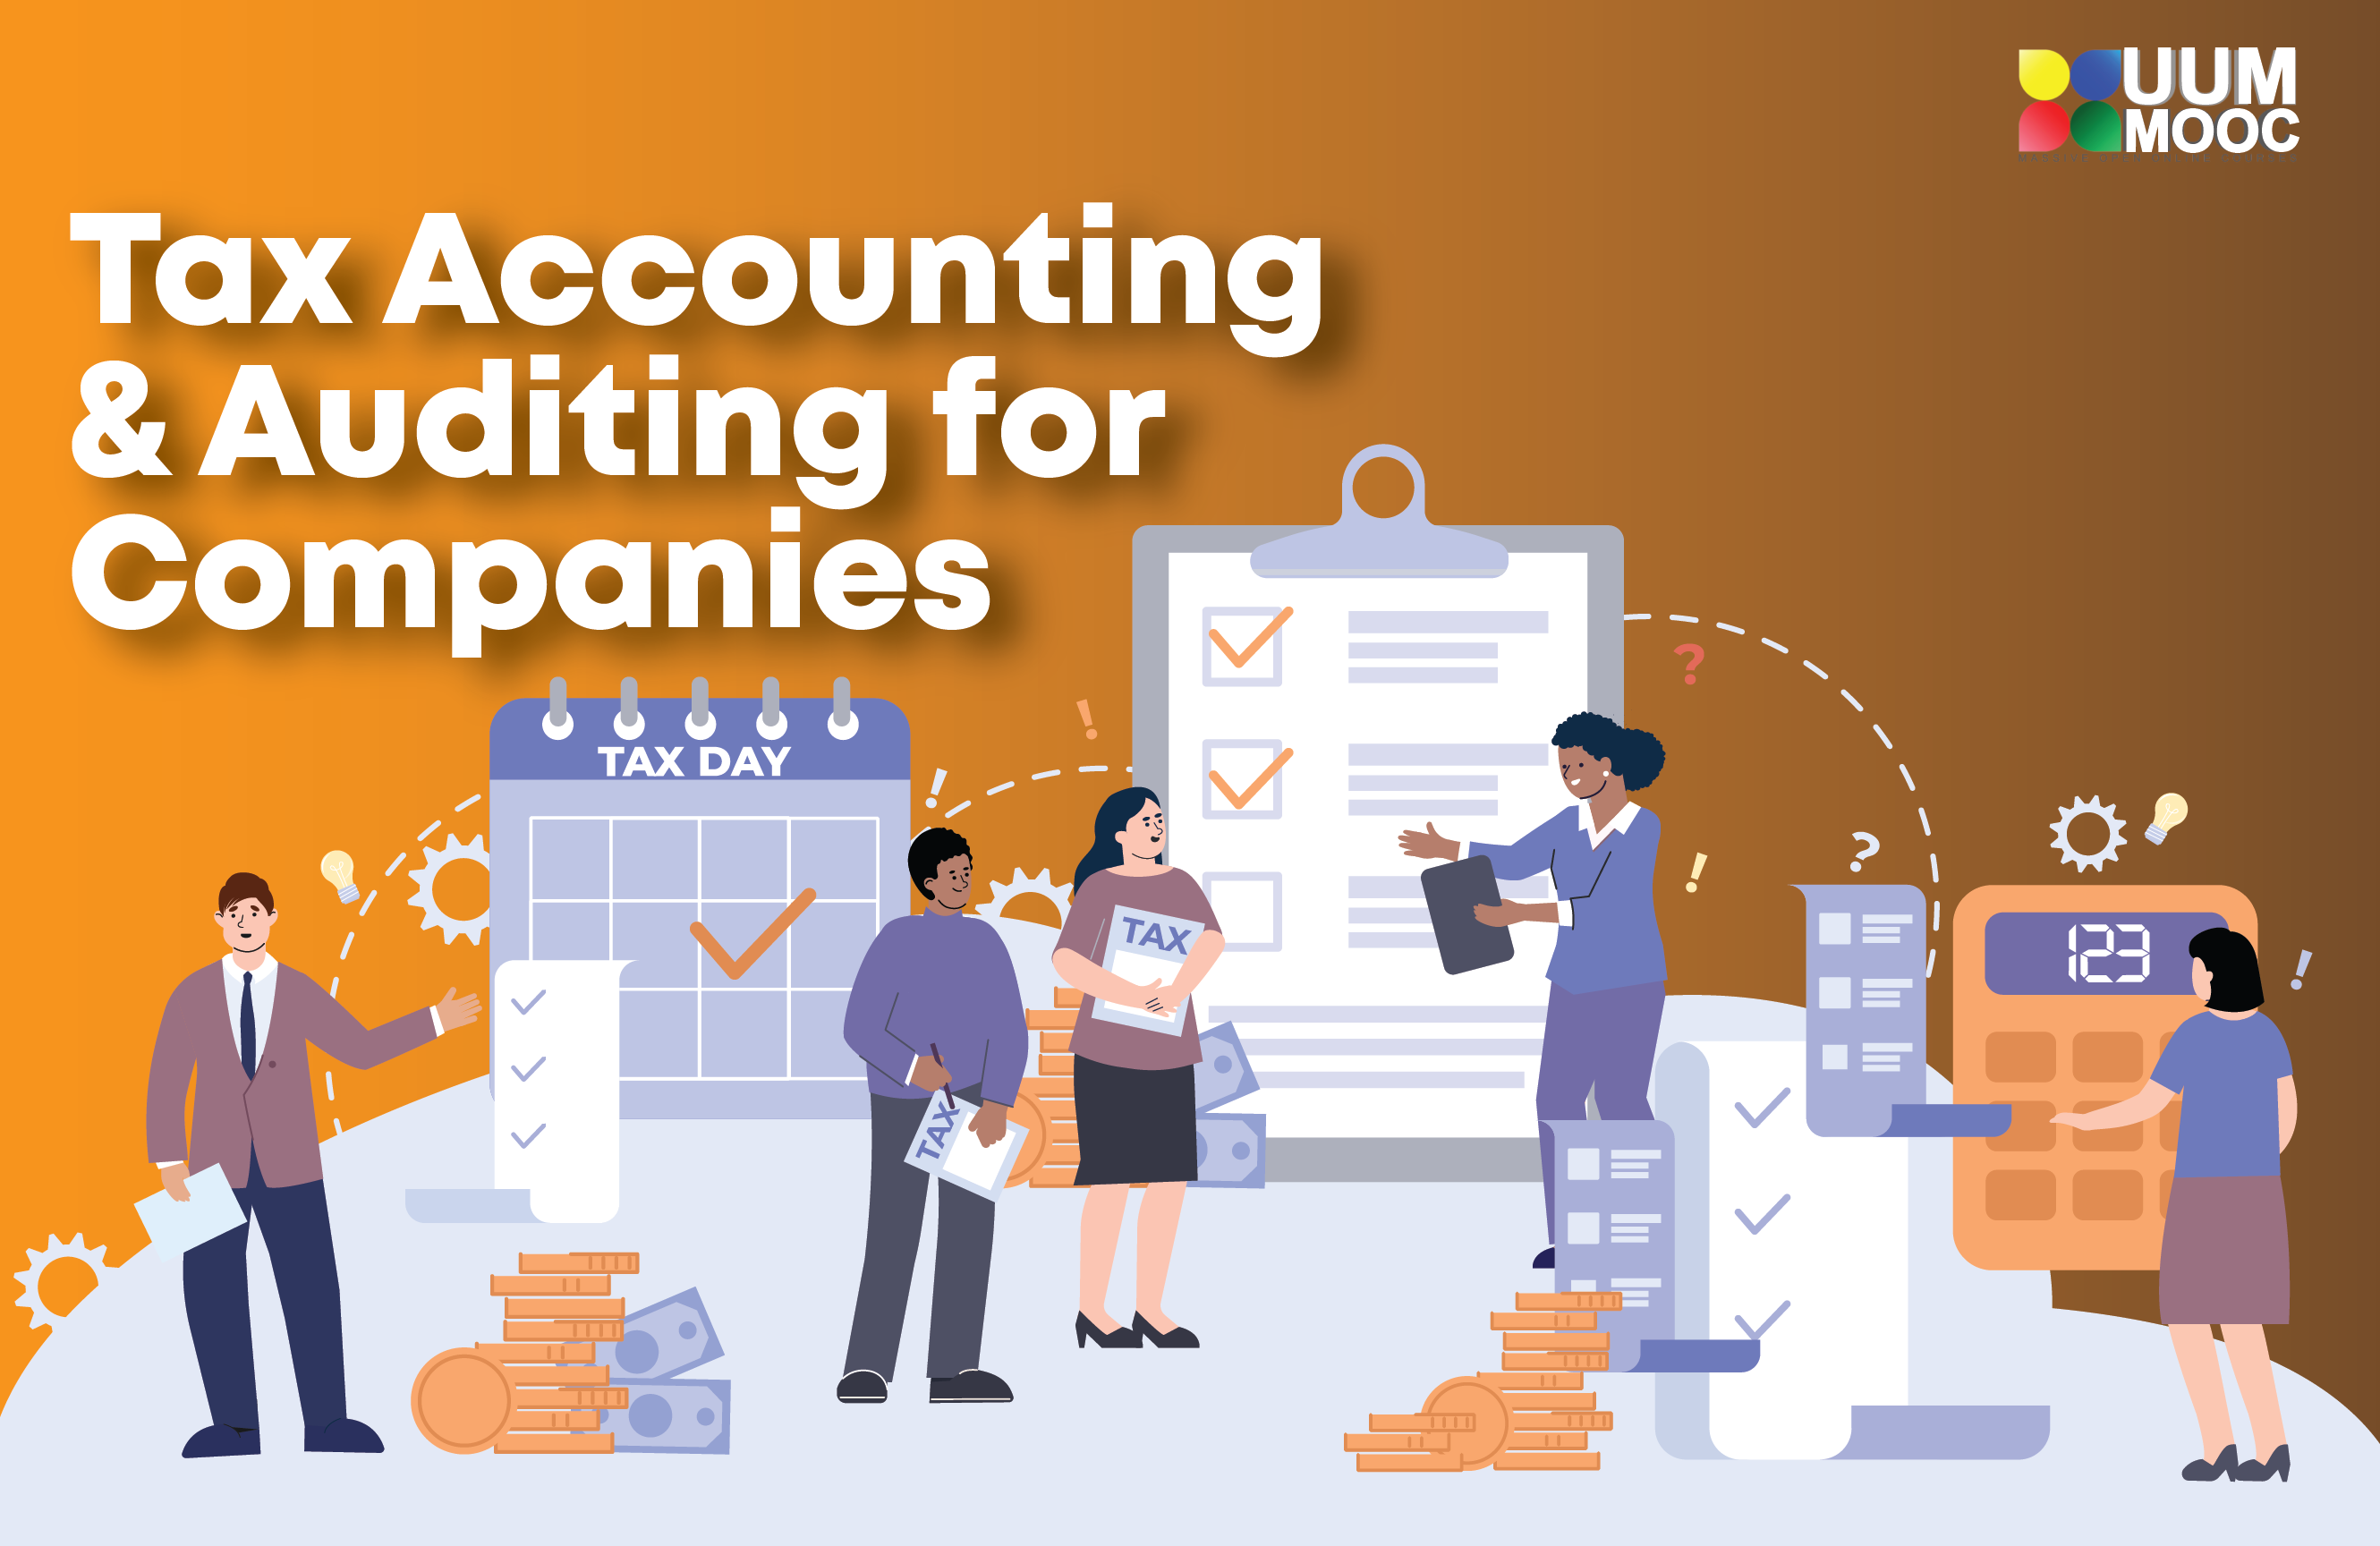 BKAT5033 Tax Accounting & Auditing for Companies